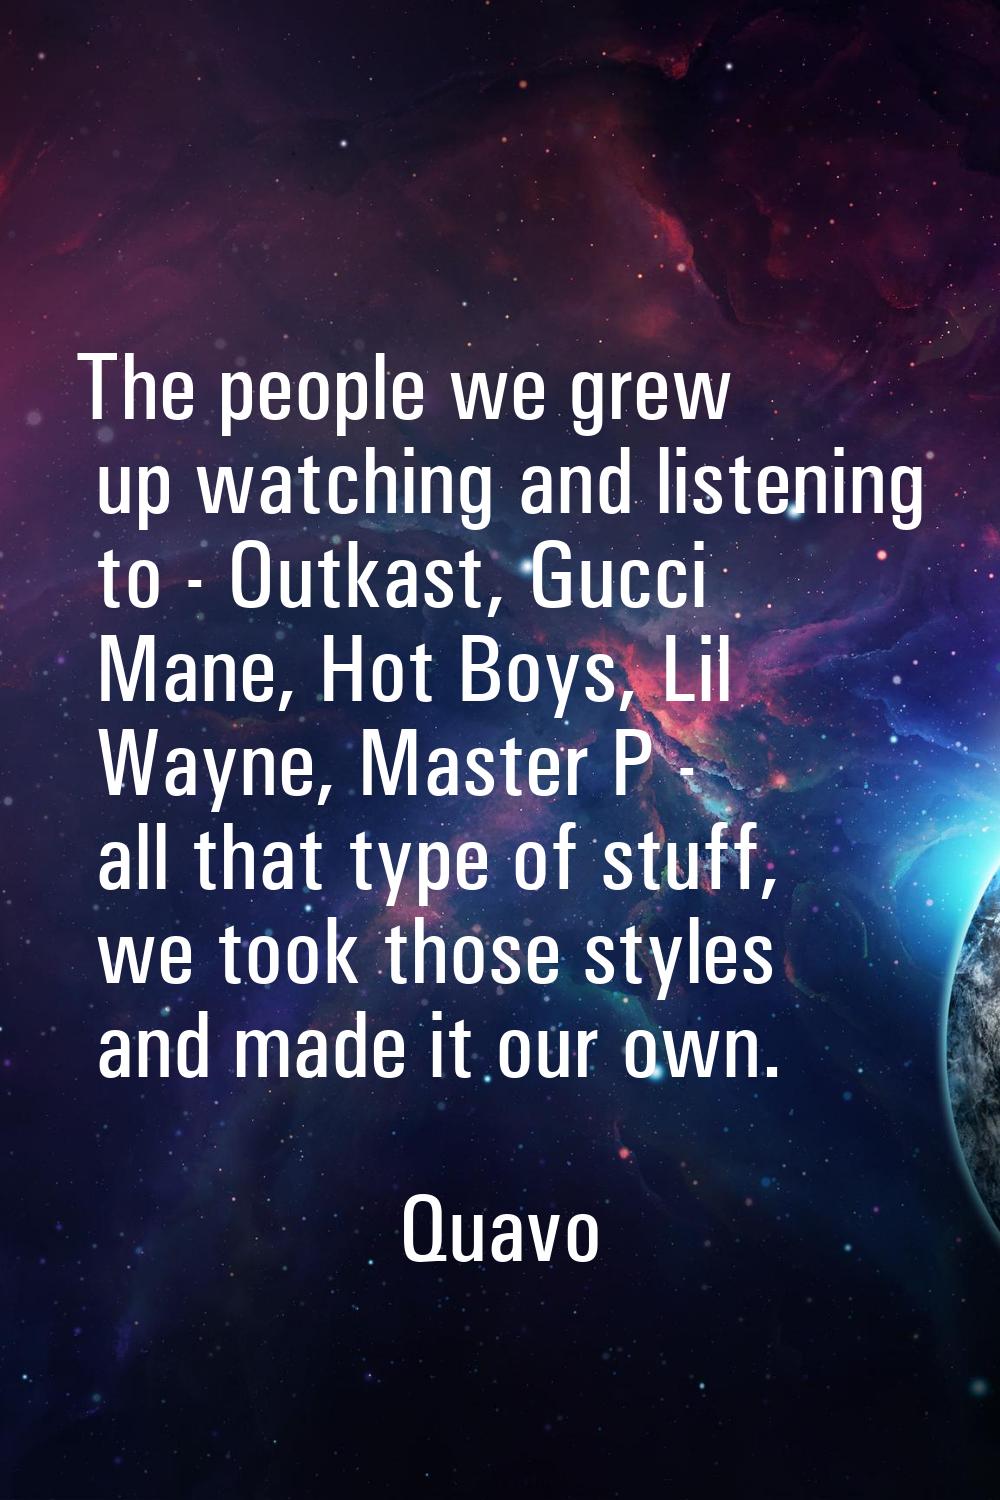 The people we grew up watching and listening to - Outkast, Gucci Mane, Hot Boys, Lil Wayne, Master 